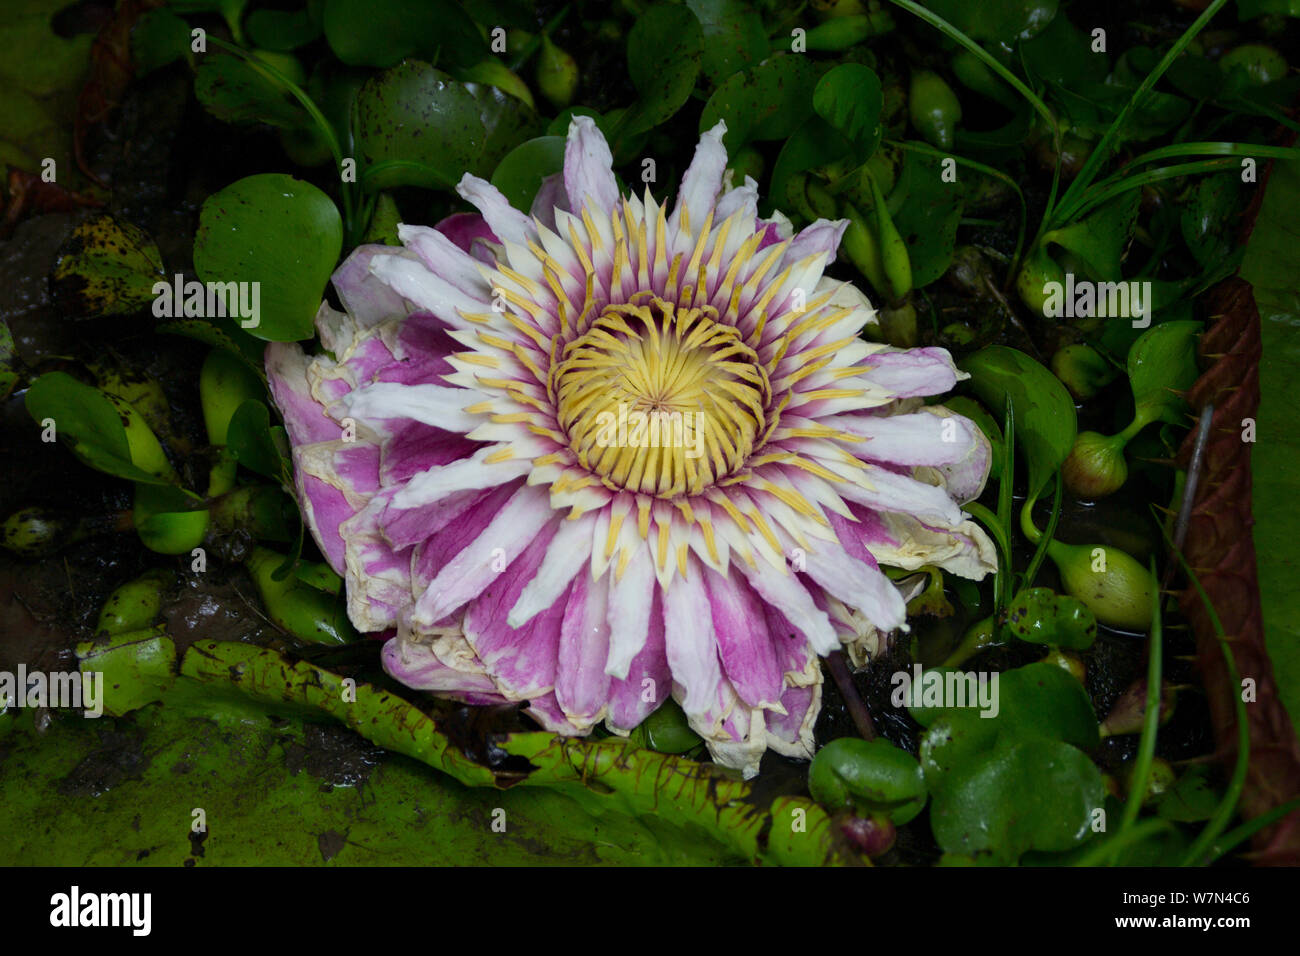 Giant water lily (Victoria cruziana) Pantanal, Matogrossense National Park, Brazil. Flowers open at night to attract beetles to pollinate them. The flower is 10c warmer than its surroundings, this helps its scent to radiate. Stock Photo